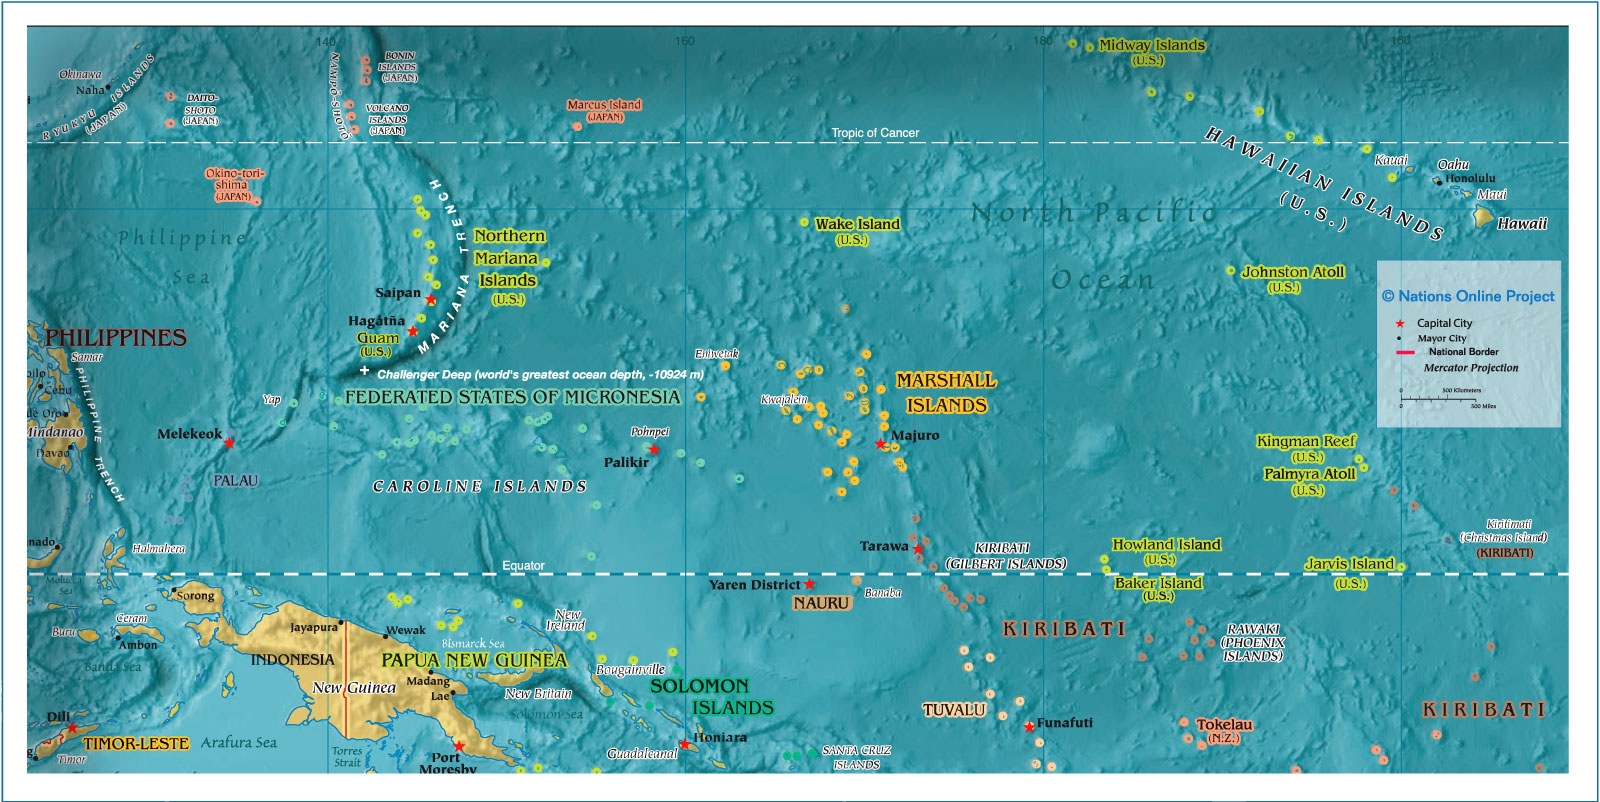 Reference Map of Micronesia